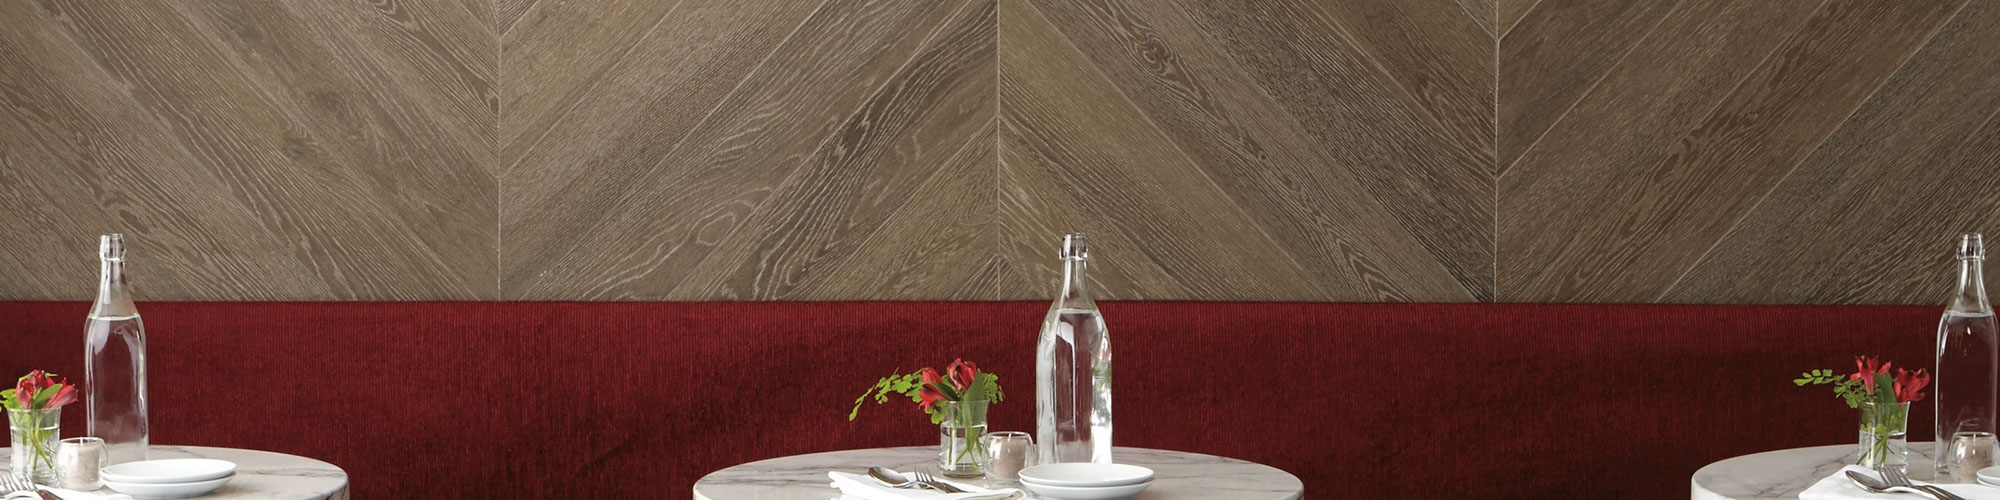 Restaurant dining room with wall-length booth covered in red velvet, herringbone wood look wall tile, marble tables with place setting & red flowers in vase.